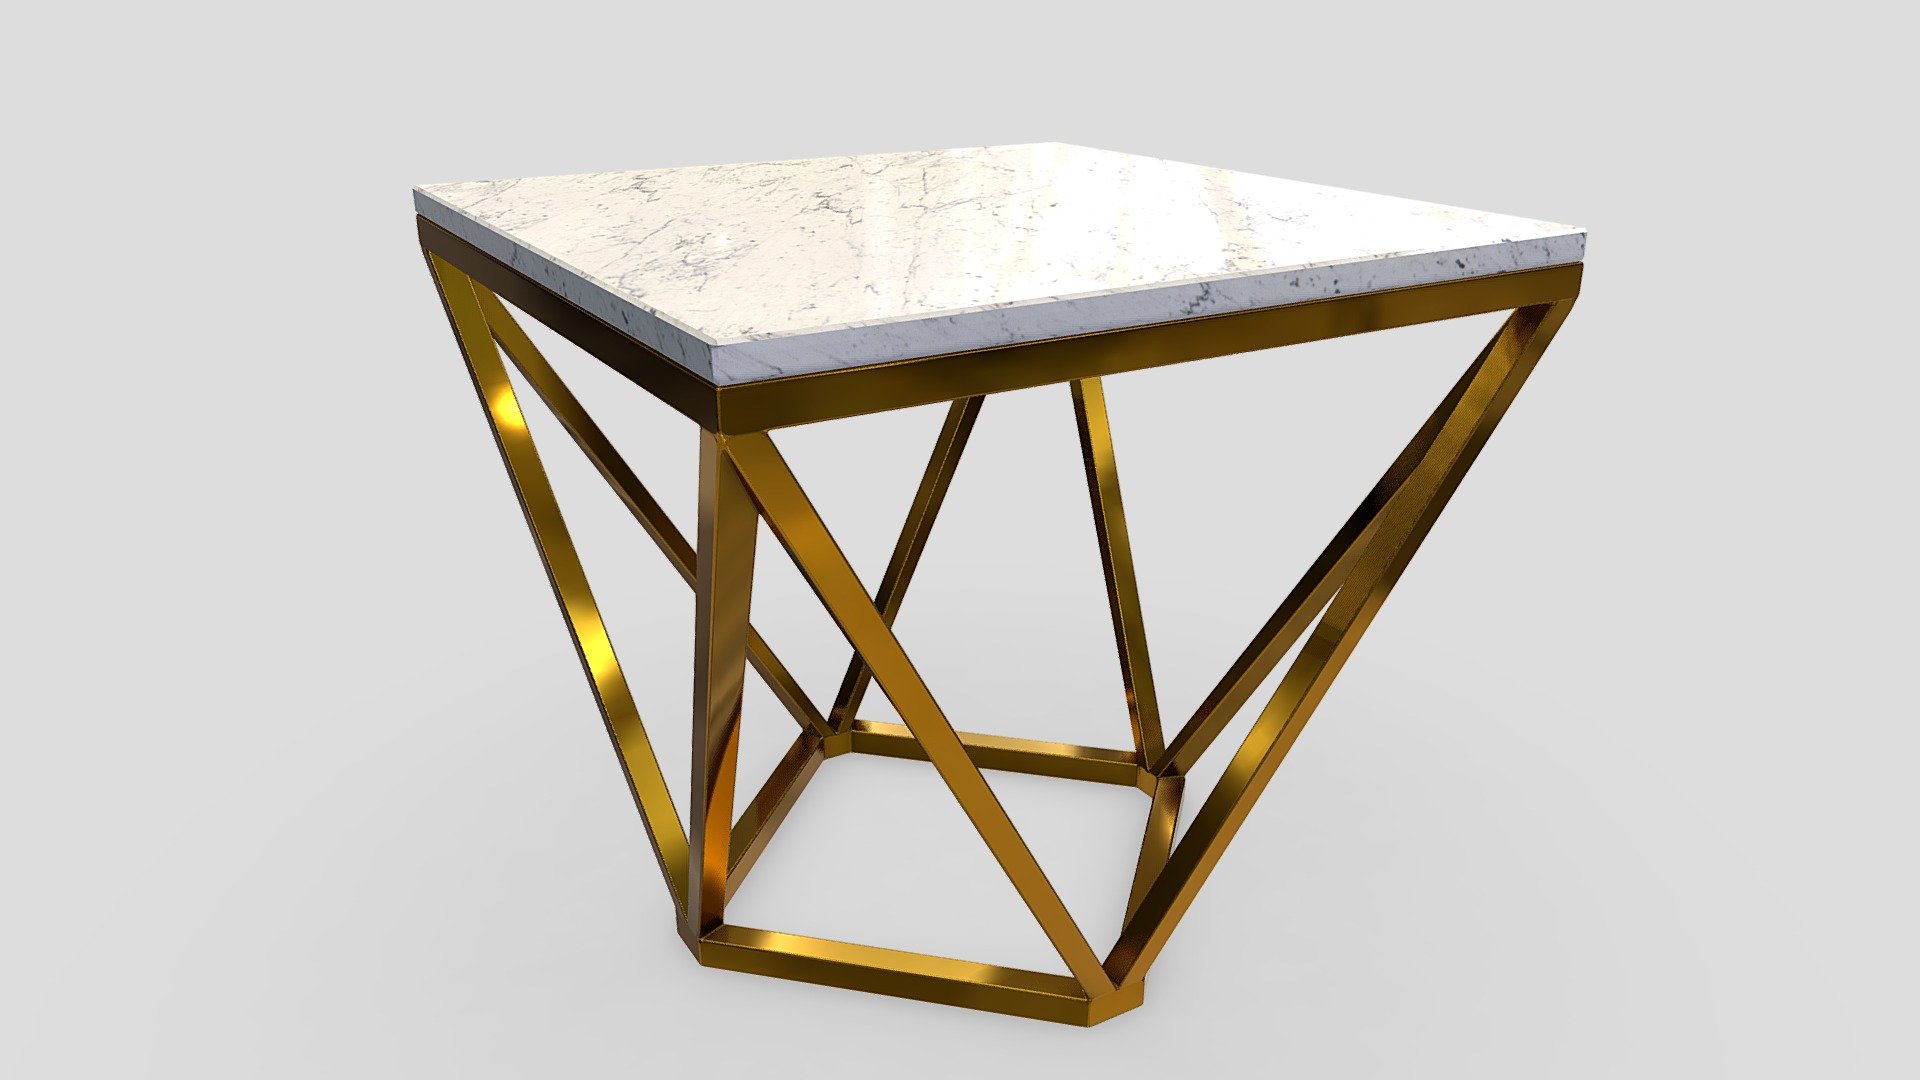 Geometric square coffee table, brass metal base and marble top.
Dimensions: 500 mm x 500 mm x 450 mm; base: 300mm x 300 mm 3d model